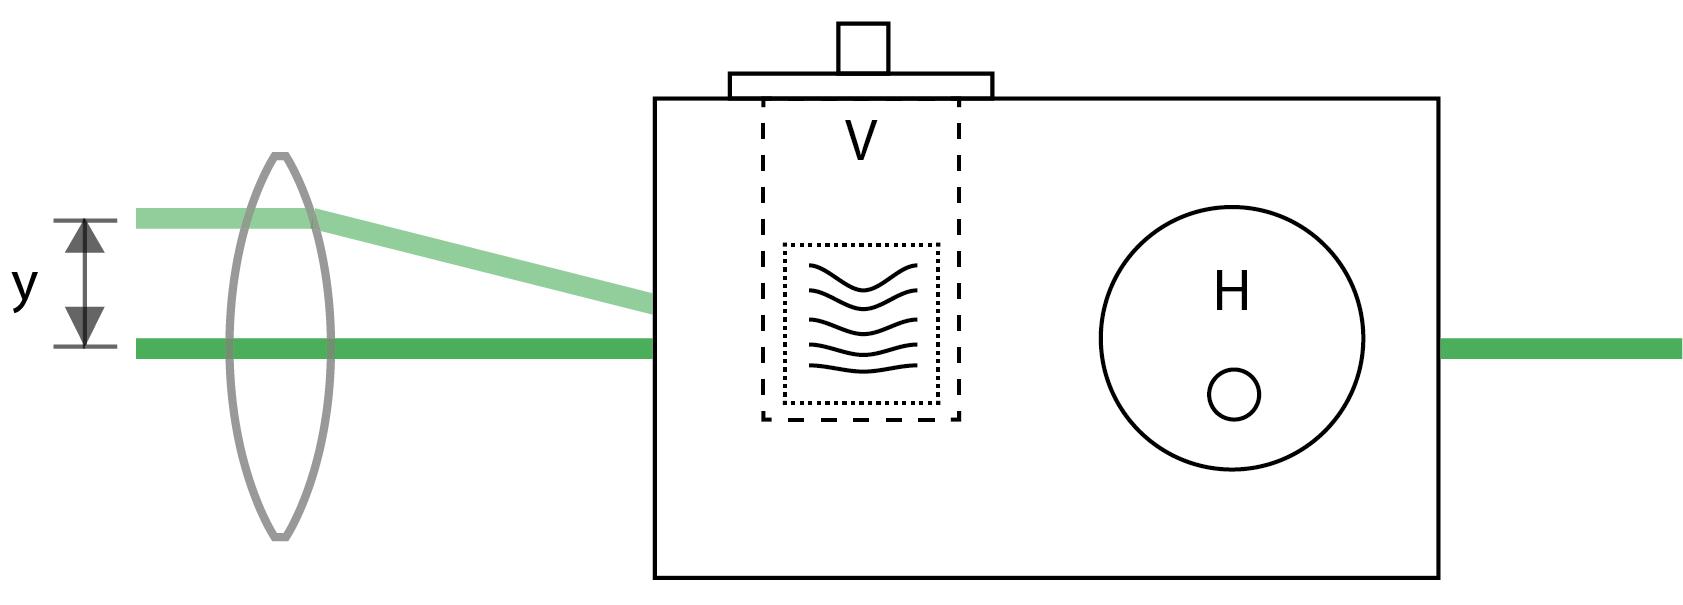 schematic of the acousto-optic deflector